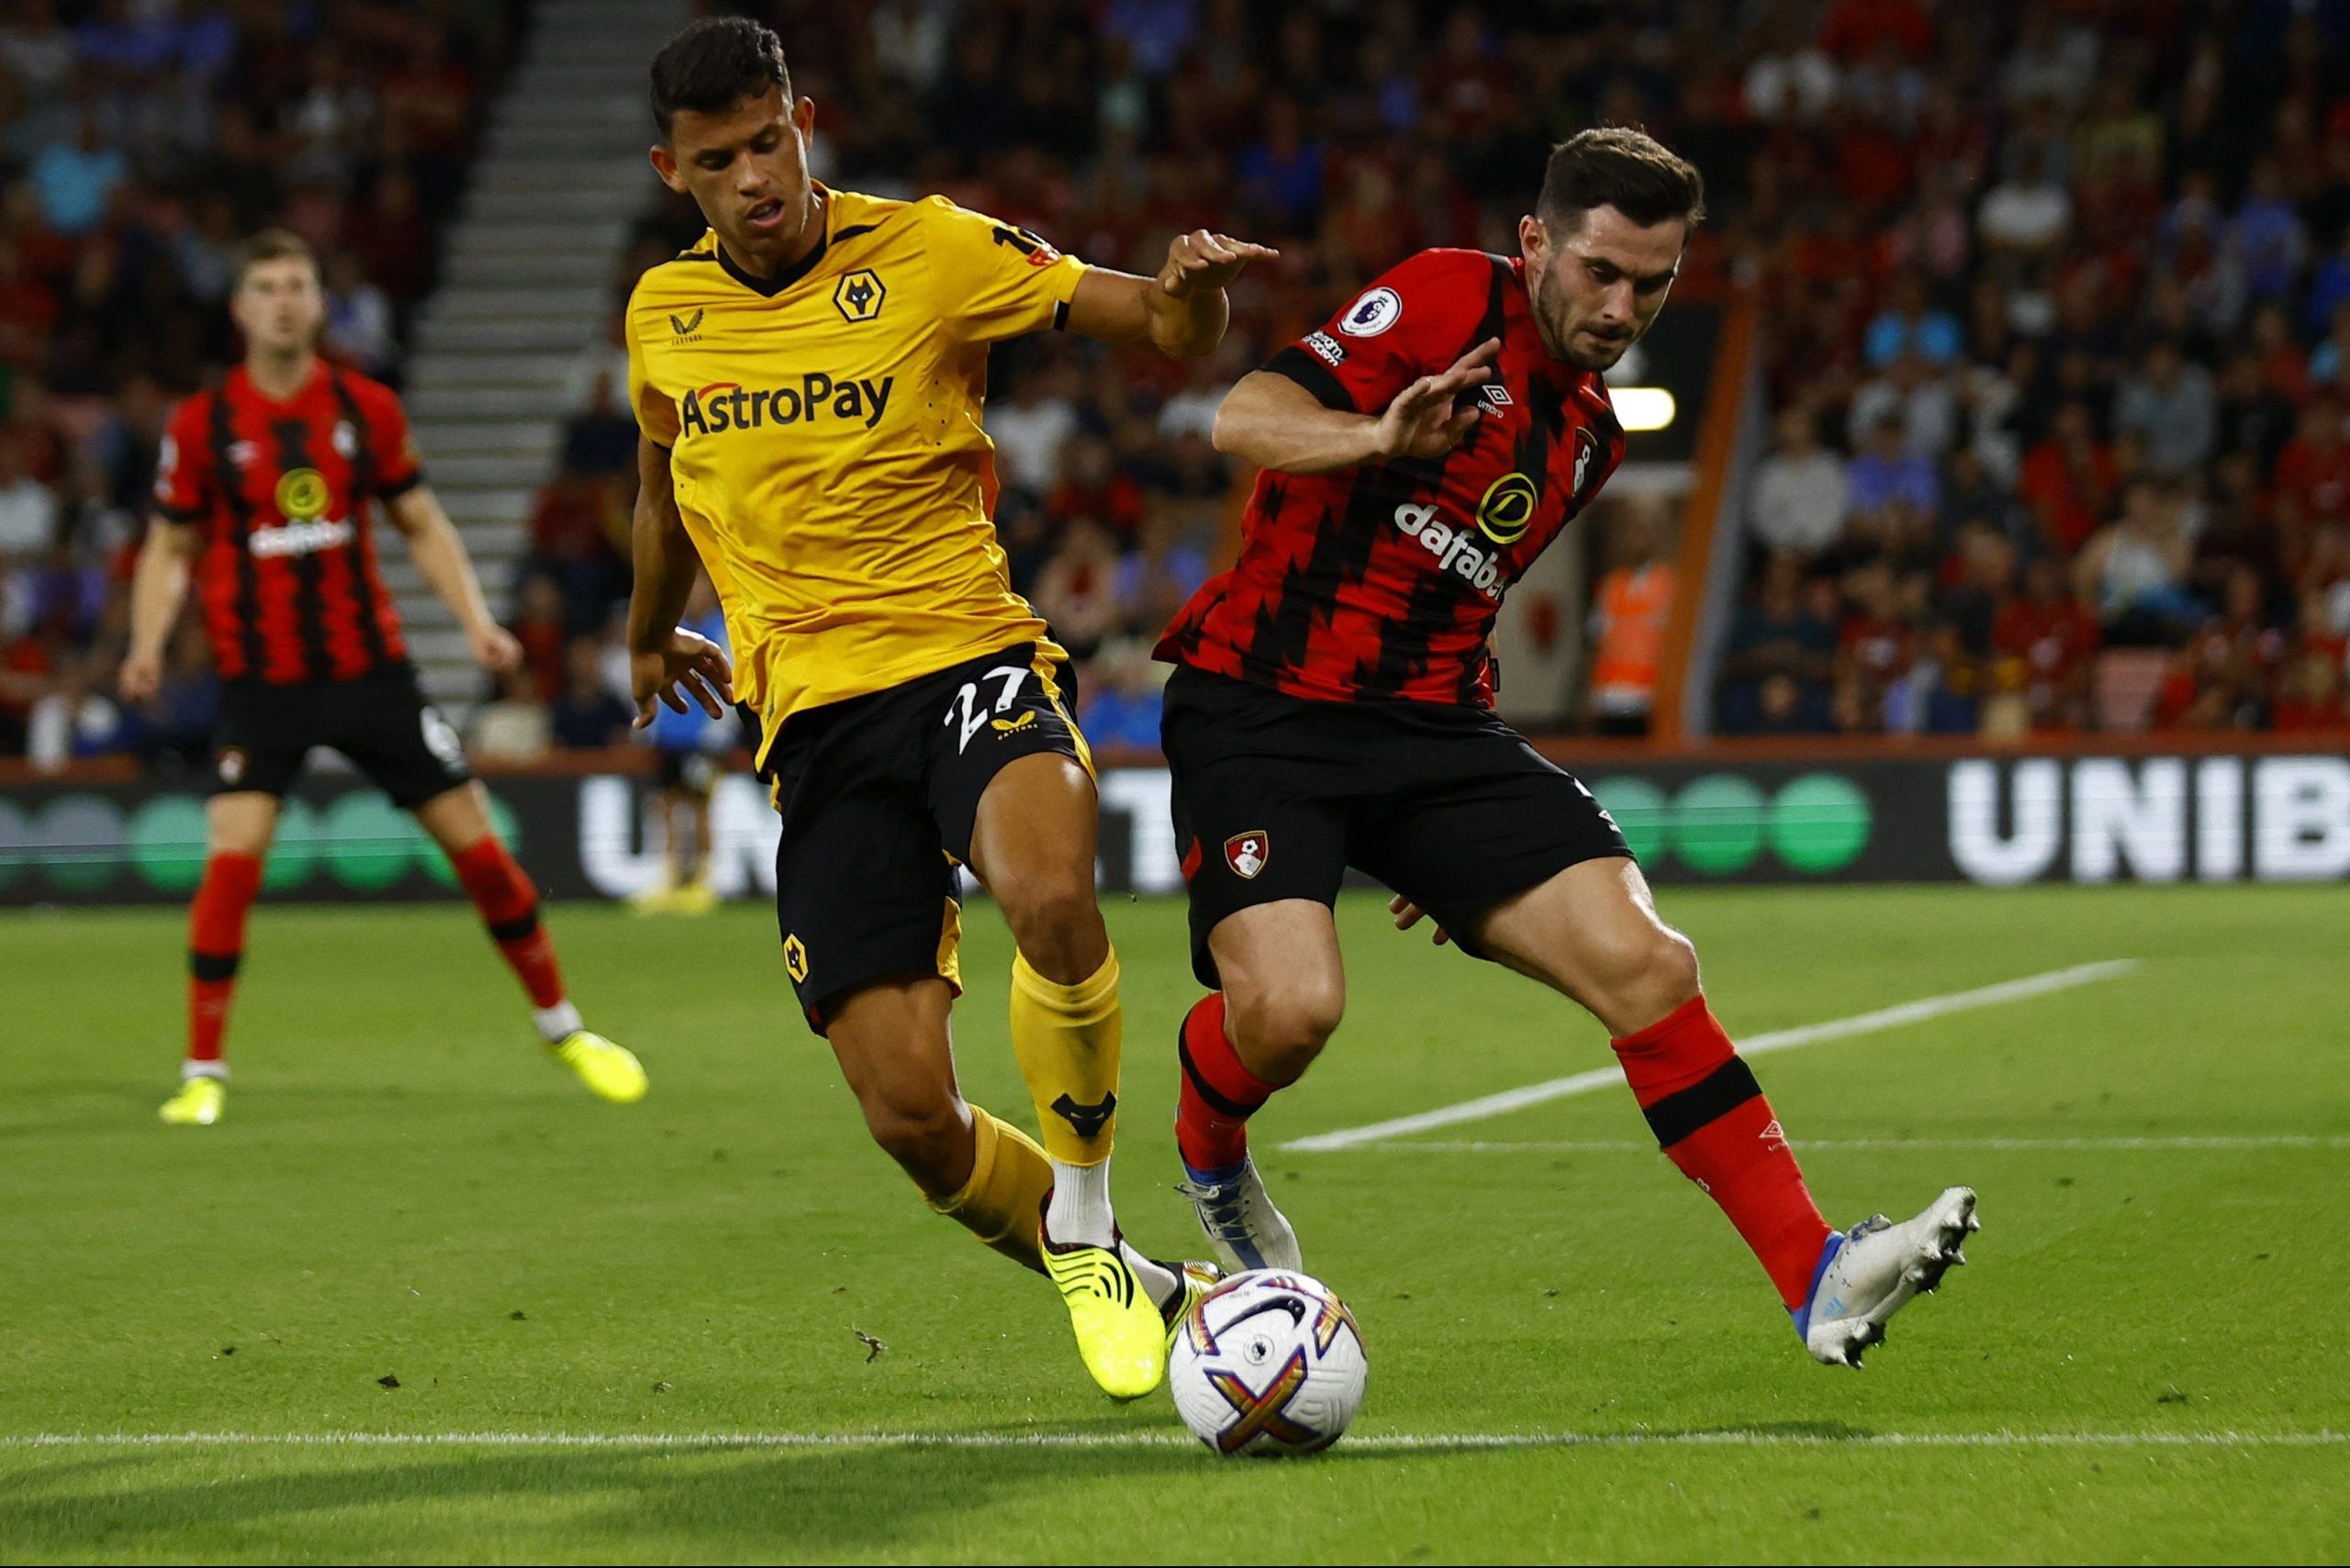 Soccer Football - Premier League - AFC Bournemouth v Wolverhampton Wanderers - Vitality Stadium, Bournemouth, Britain - August 31, 2022 Wolverhampton Wanderers' Matheus Nunes in action with AFC Bournemouth's Lewis Cook Action Images via Reuters/Andrew Boyers EDITORIAL USE ONLY. No use with unauthorized audio, video, data, fixture lists, club/league logos or 'live' services. Online in-match use limited to 75 images, no video emulation. No use in betting, games or single club /league/player public